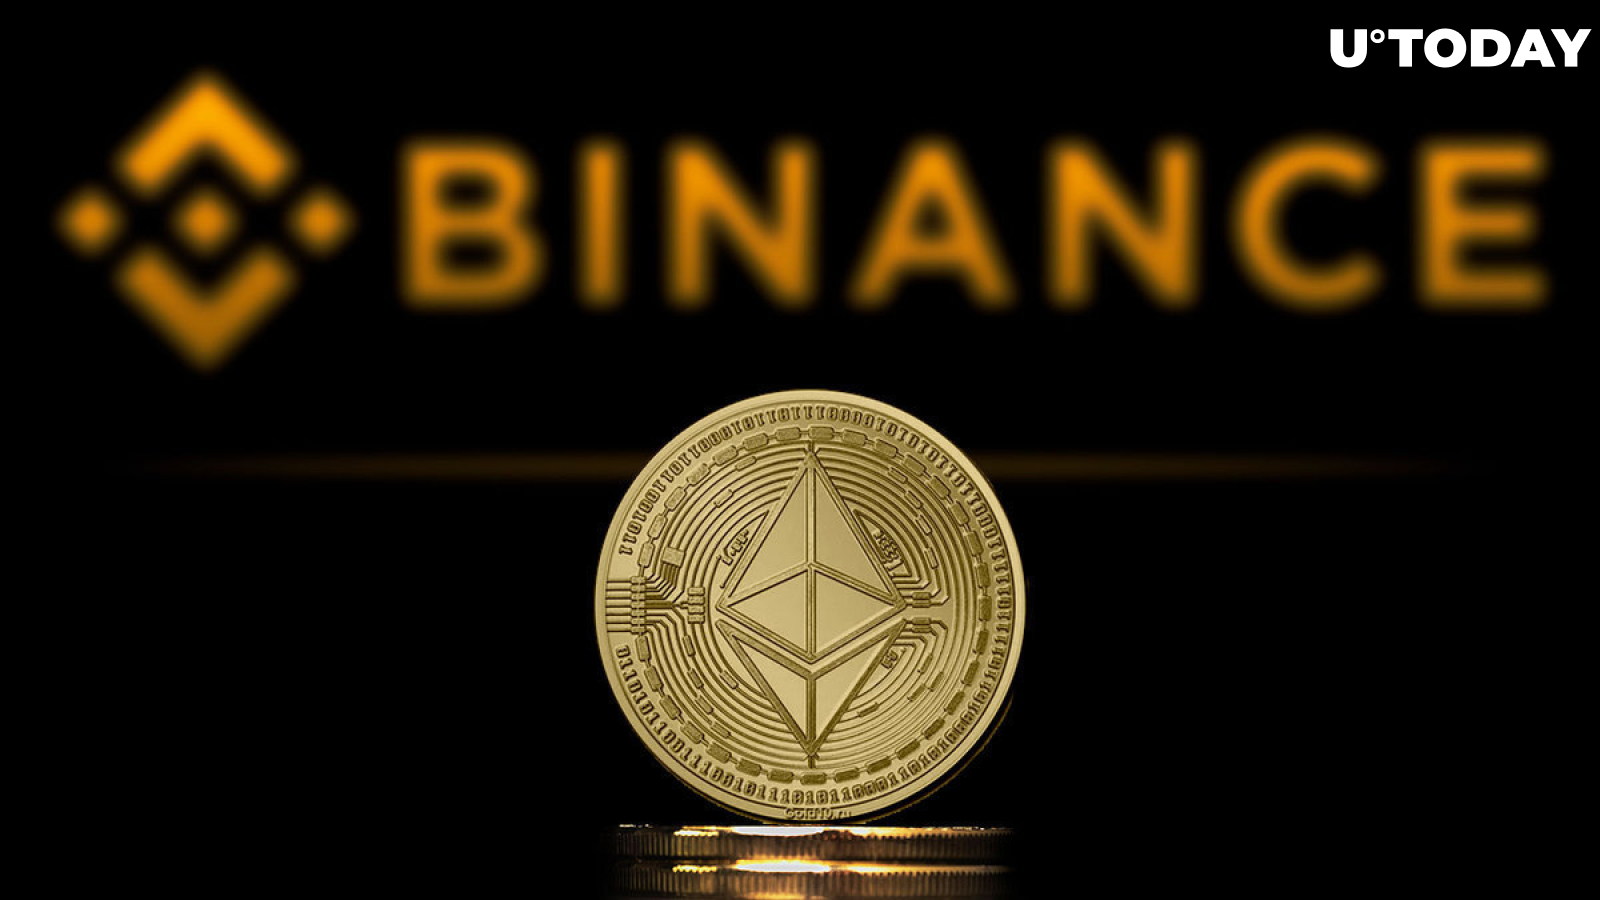 Binance Enables Withdrawal Option for ETH 2.0 Staking: Details